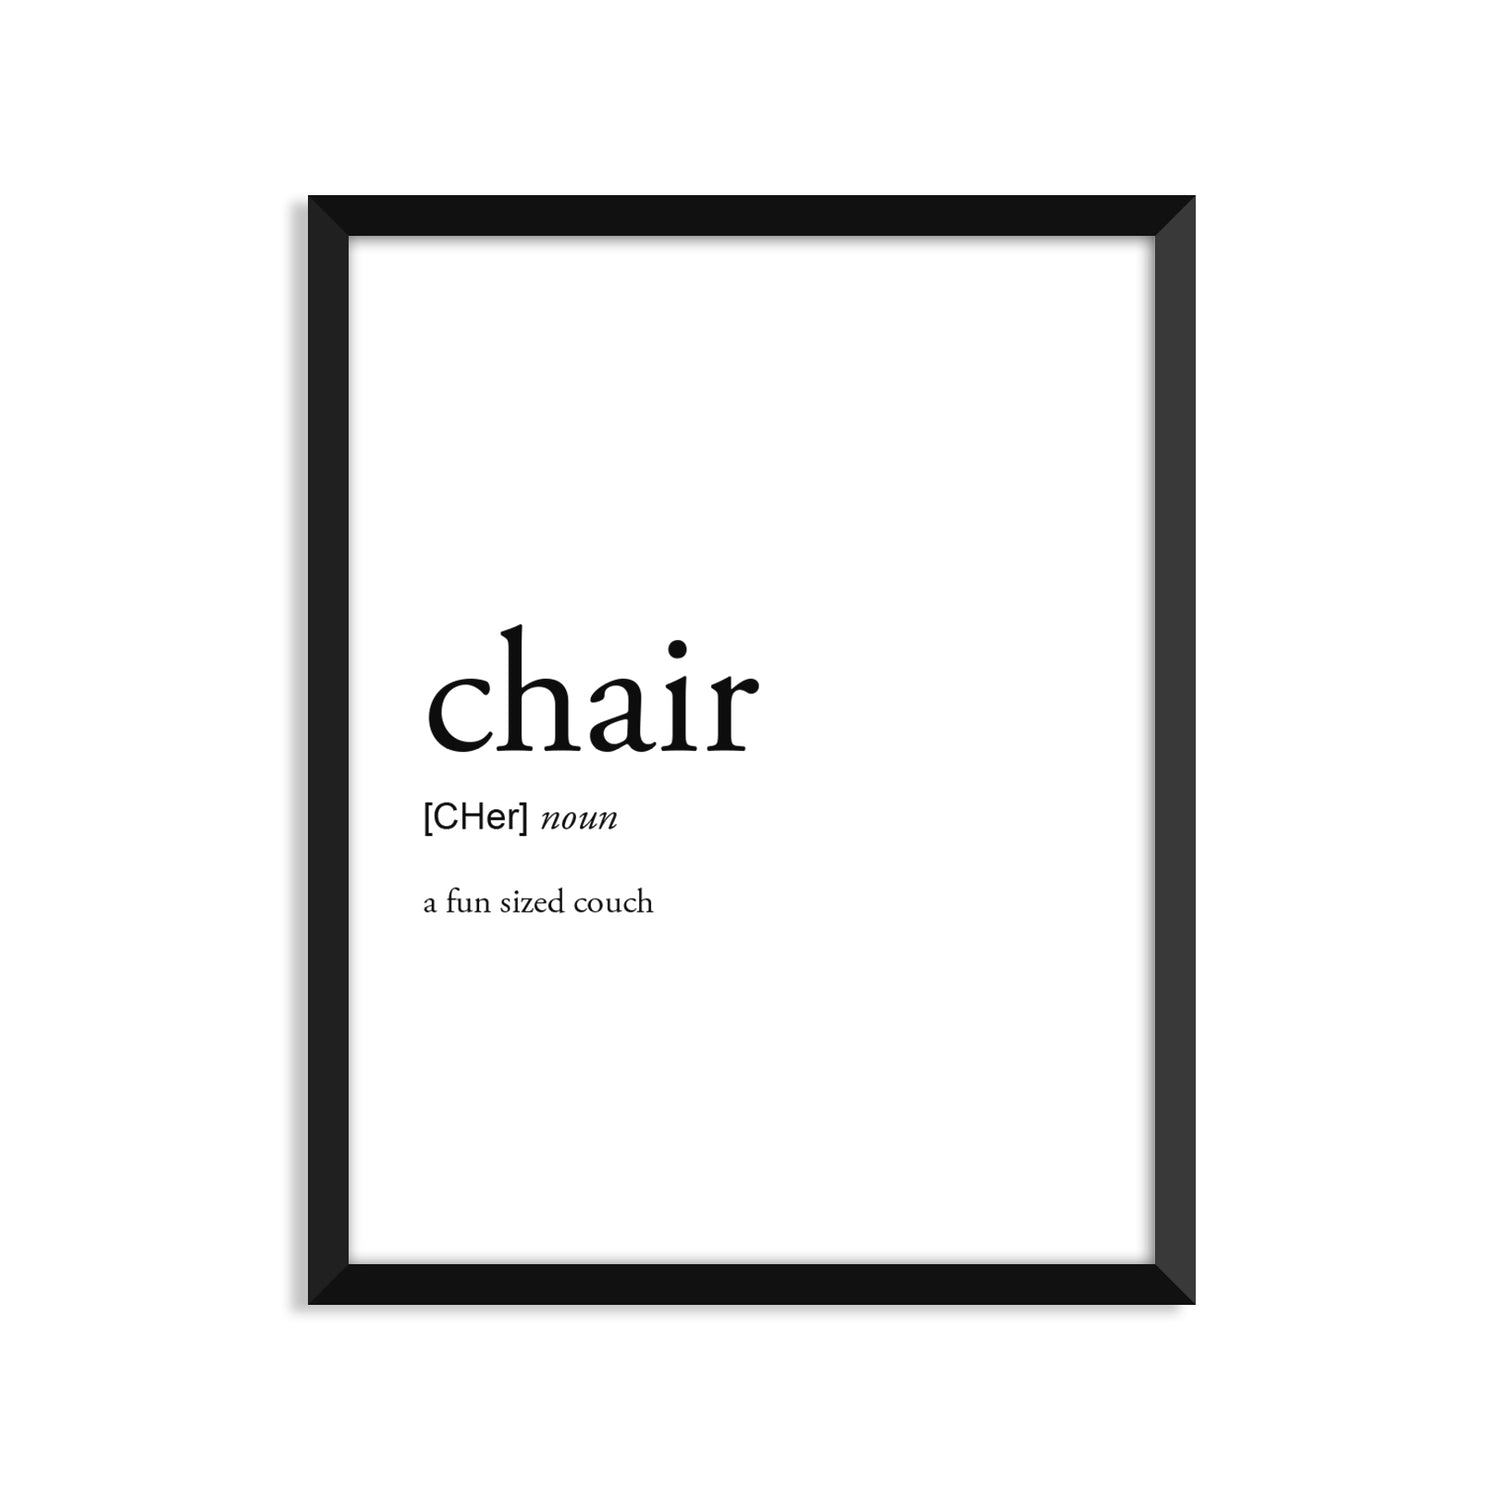 Chair Definition - Unframed Art Print Or Greeting Card